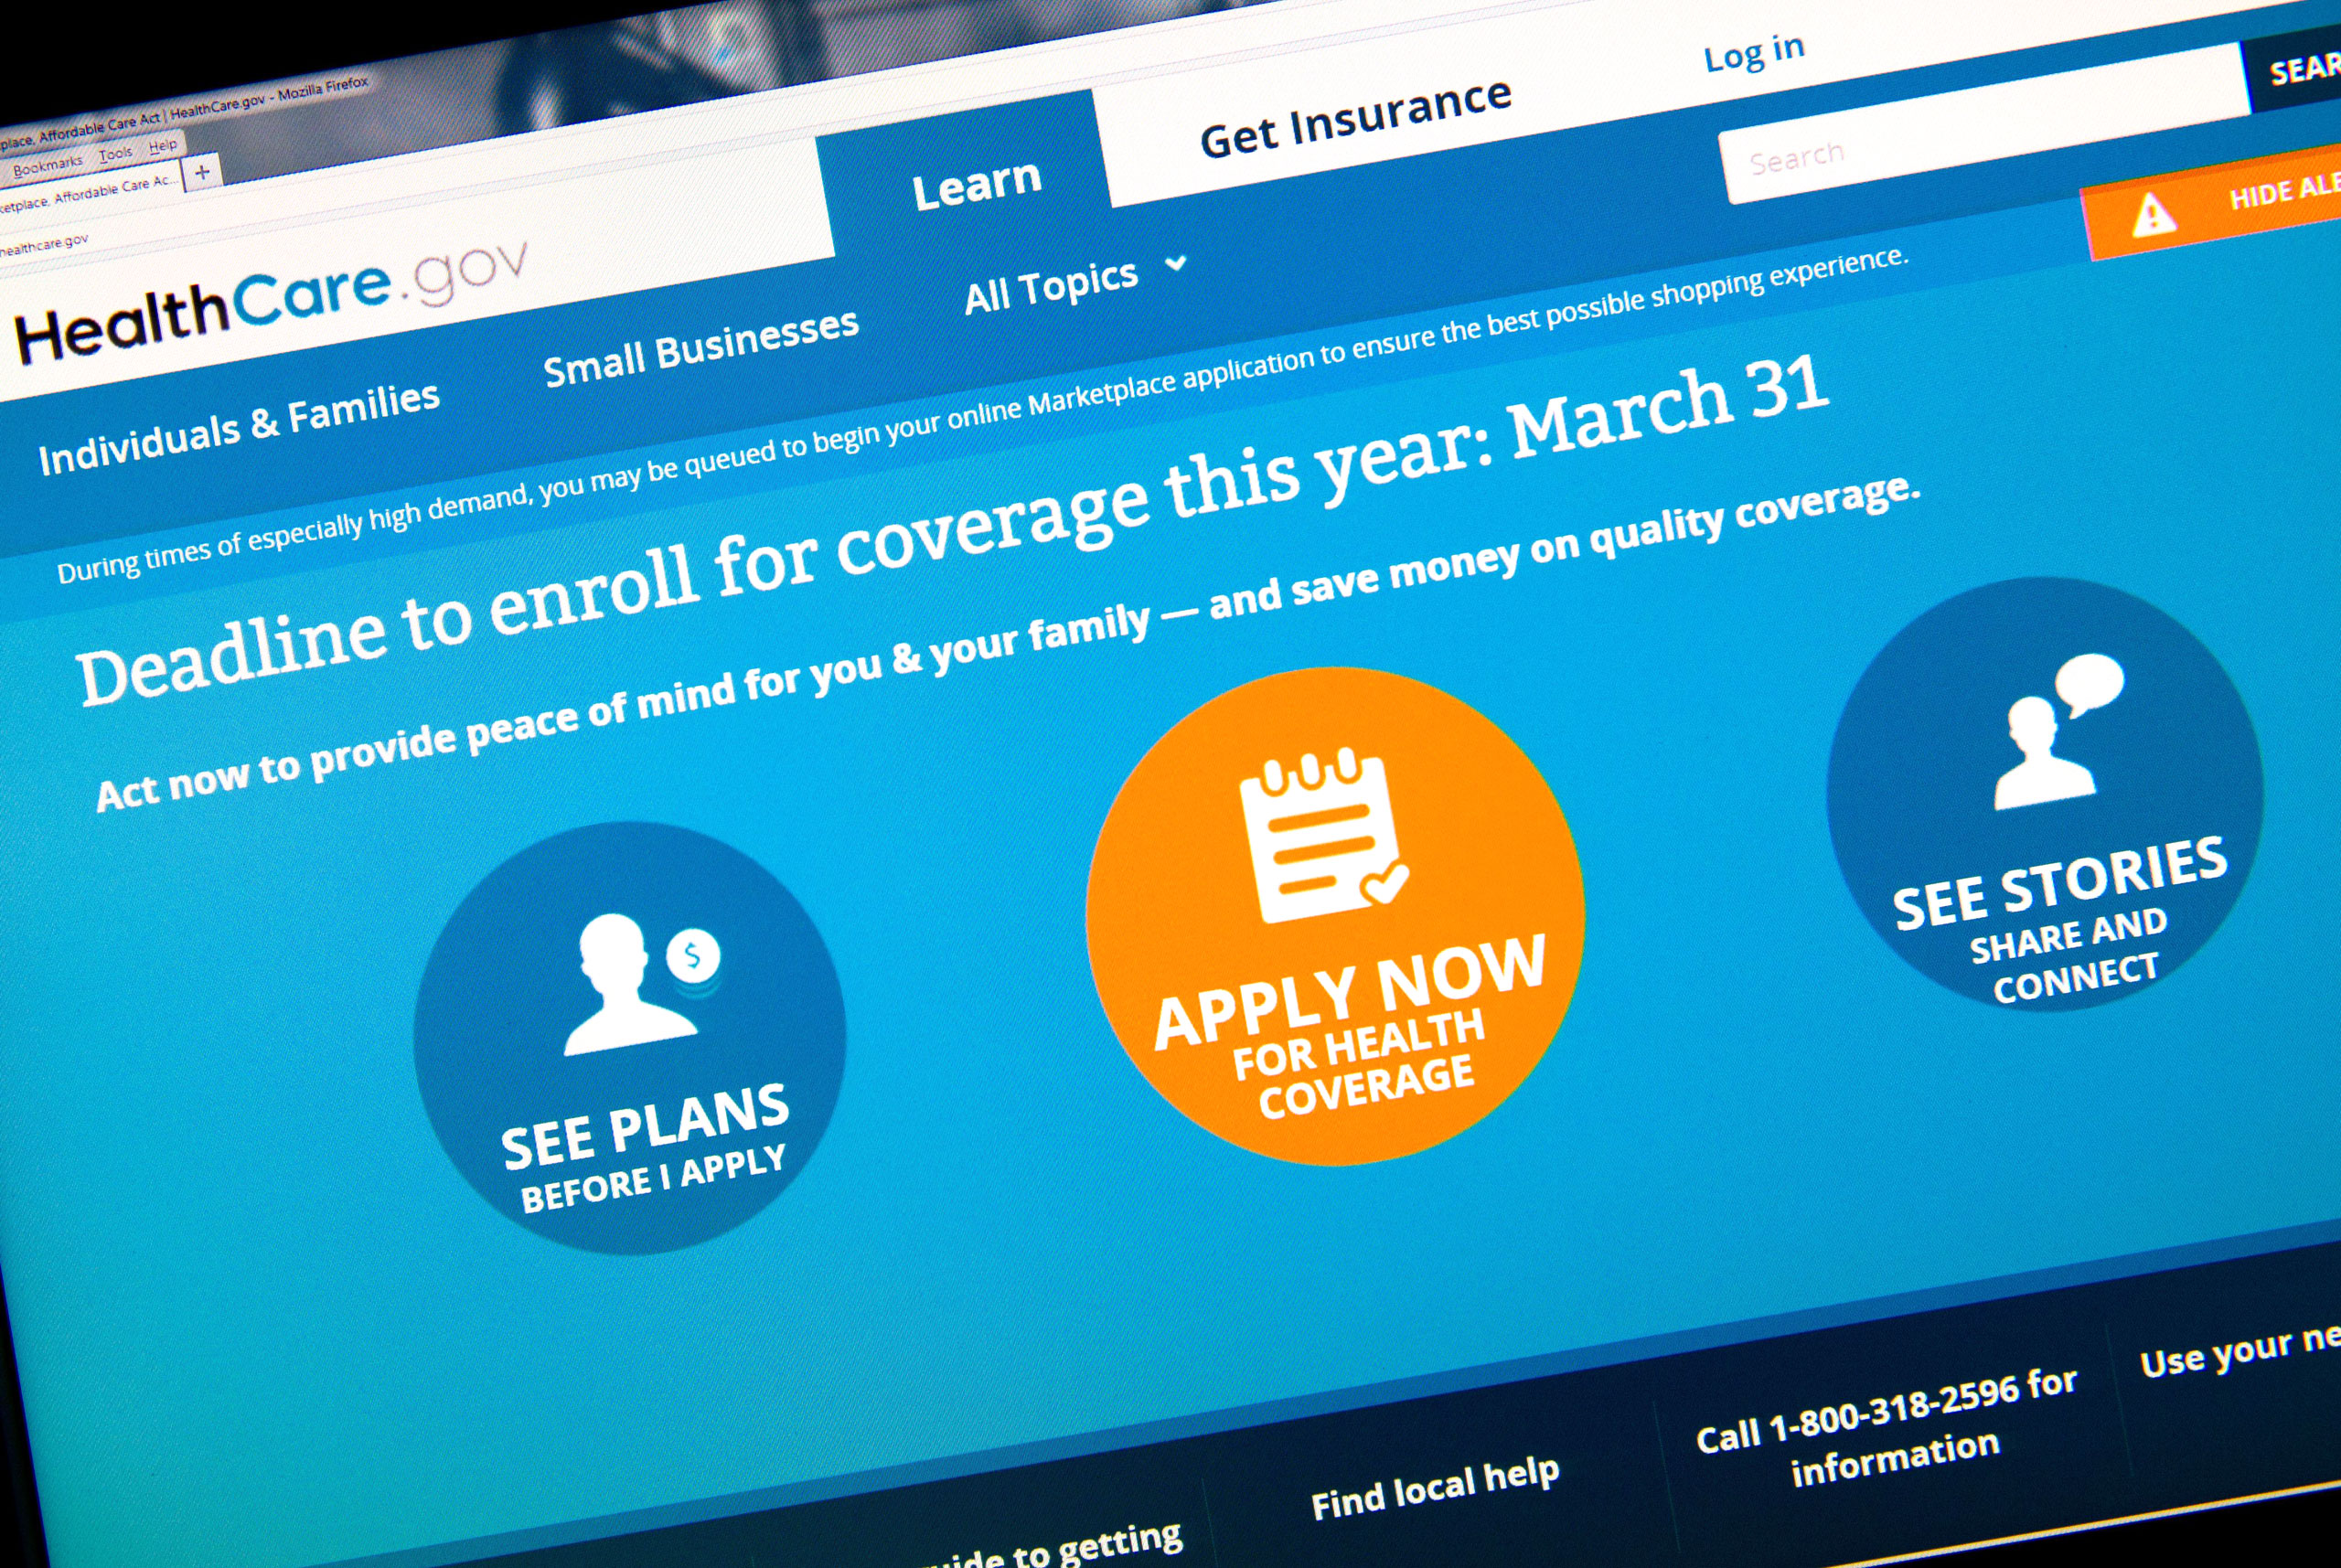 The home page for the HealthCare.gov on March 31, 2014.